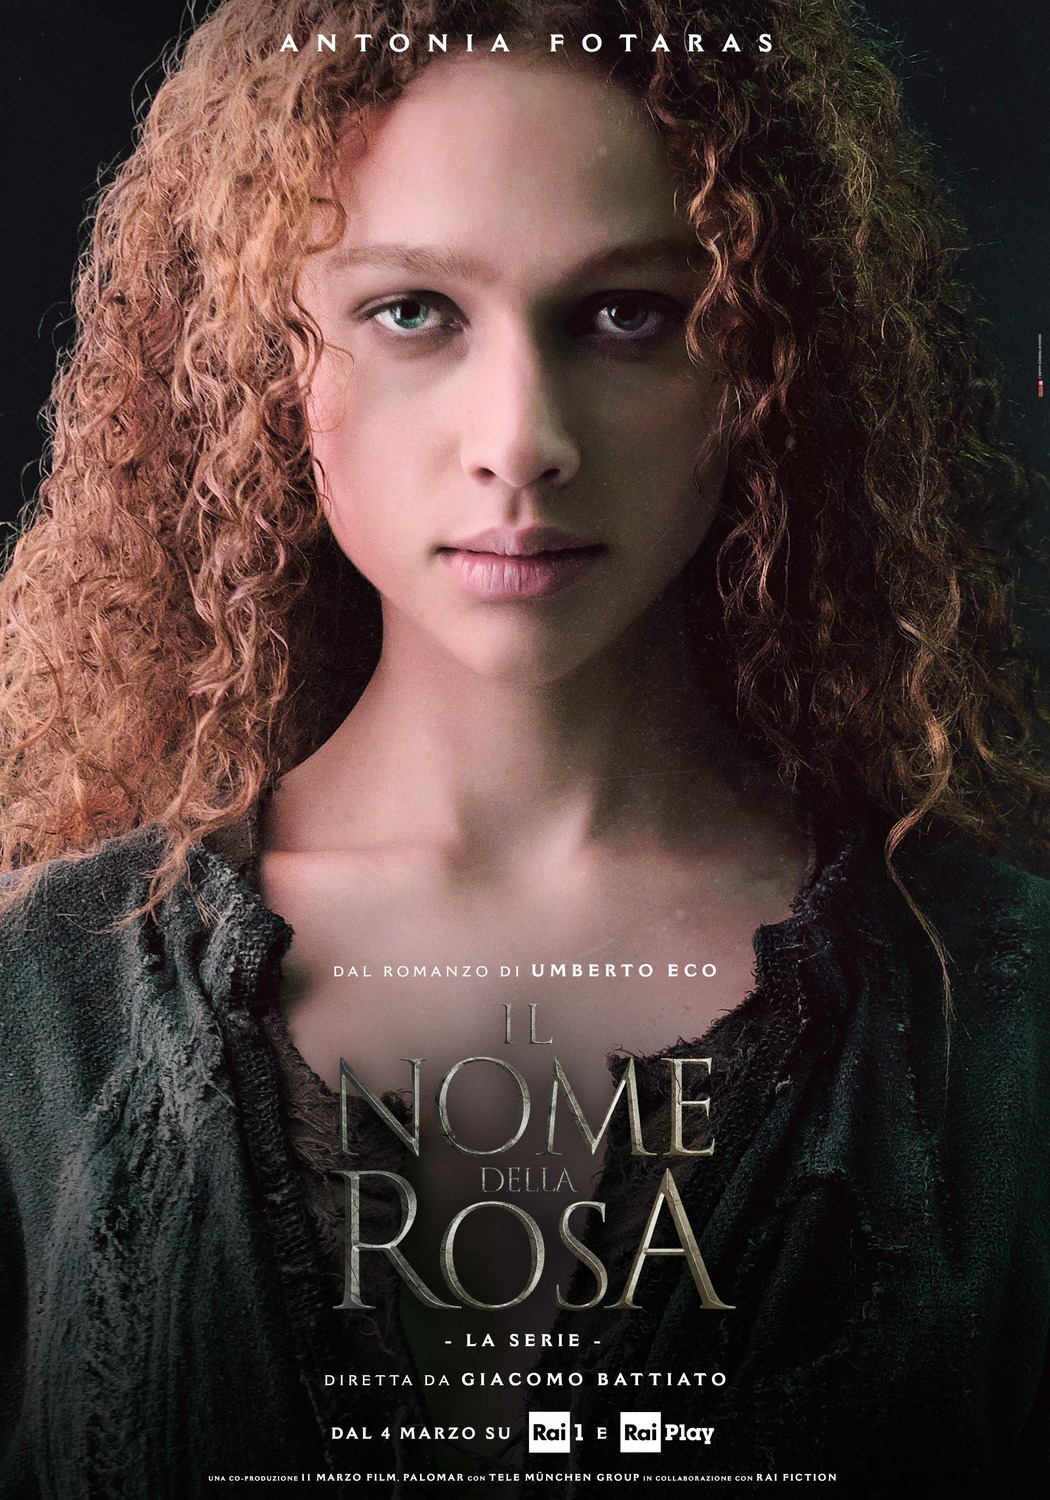 Extra Large TV Poster Image for The Name of the Rose (#11 of 14)